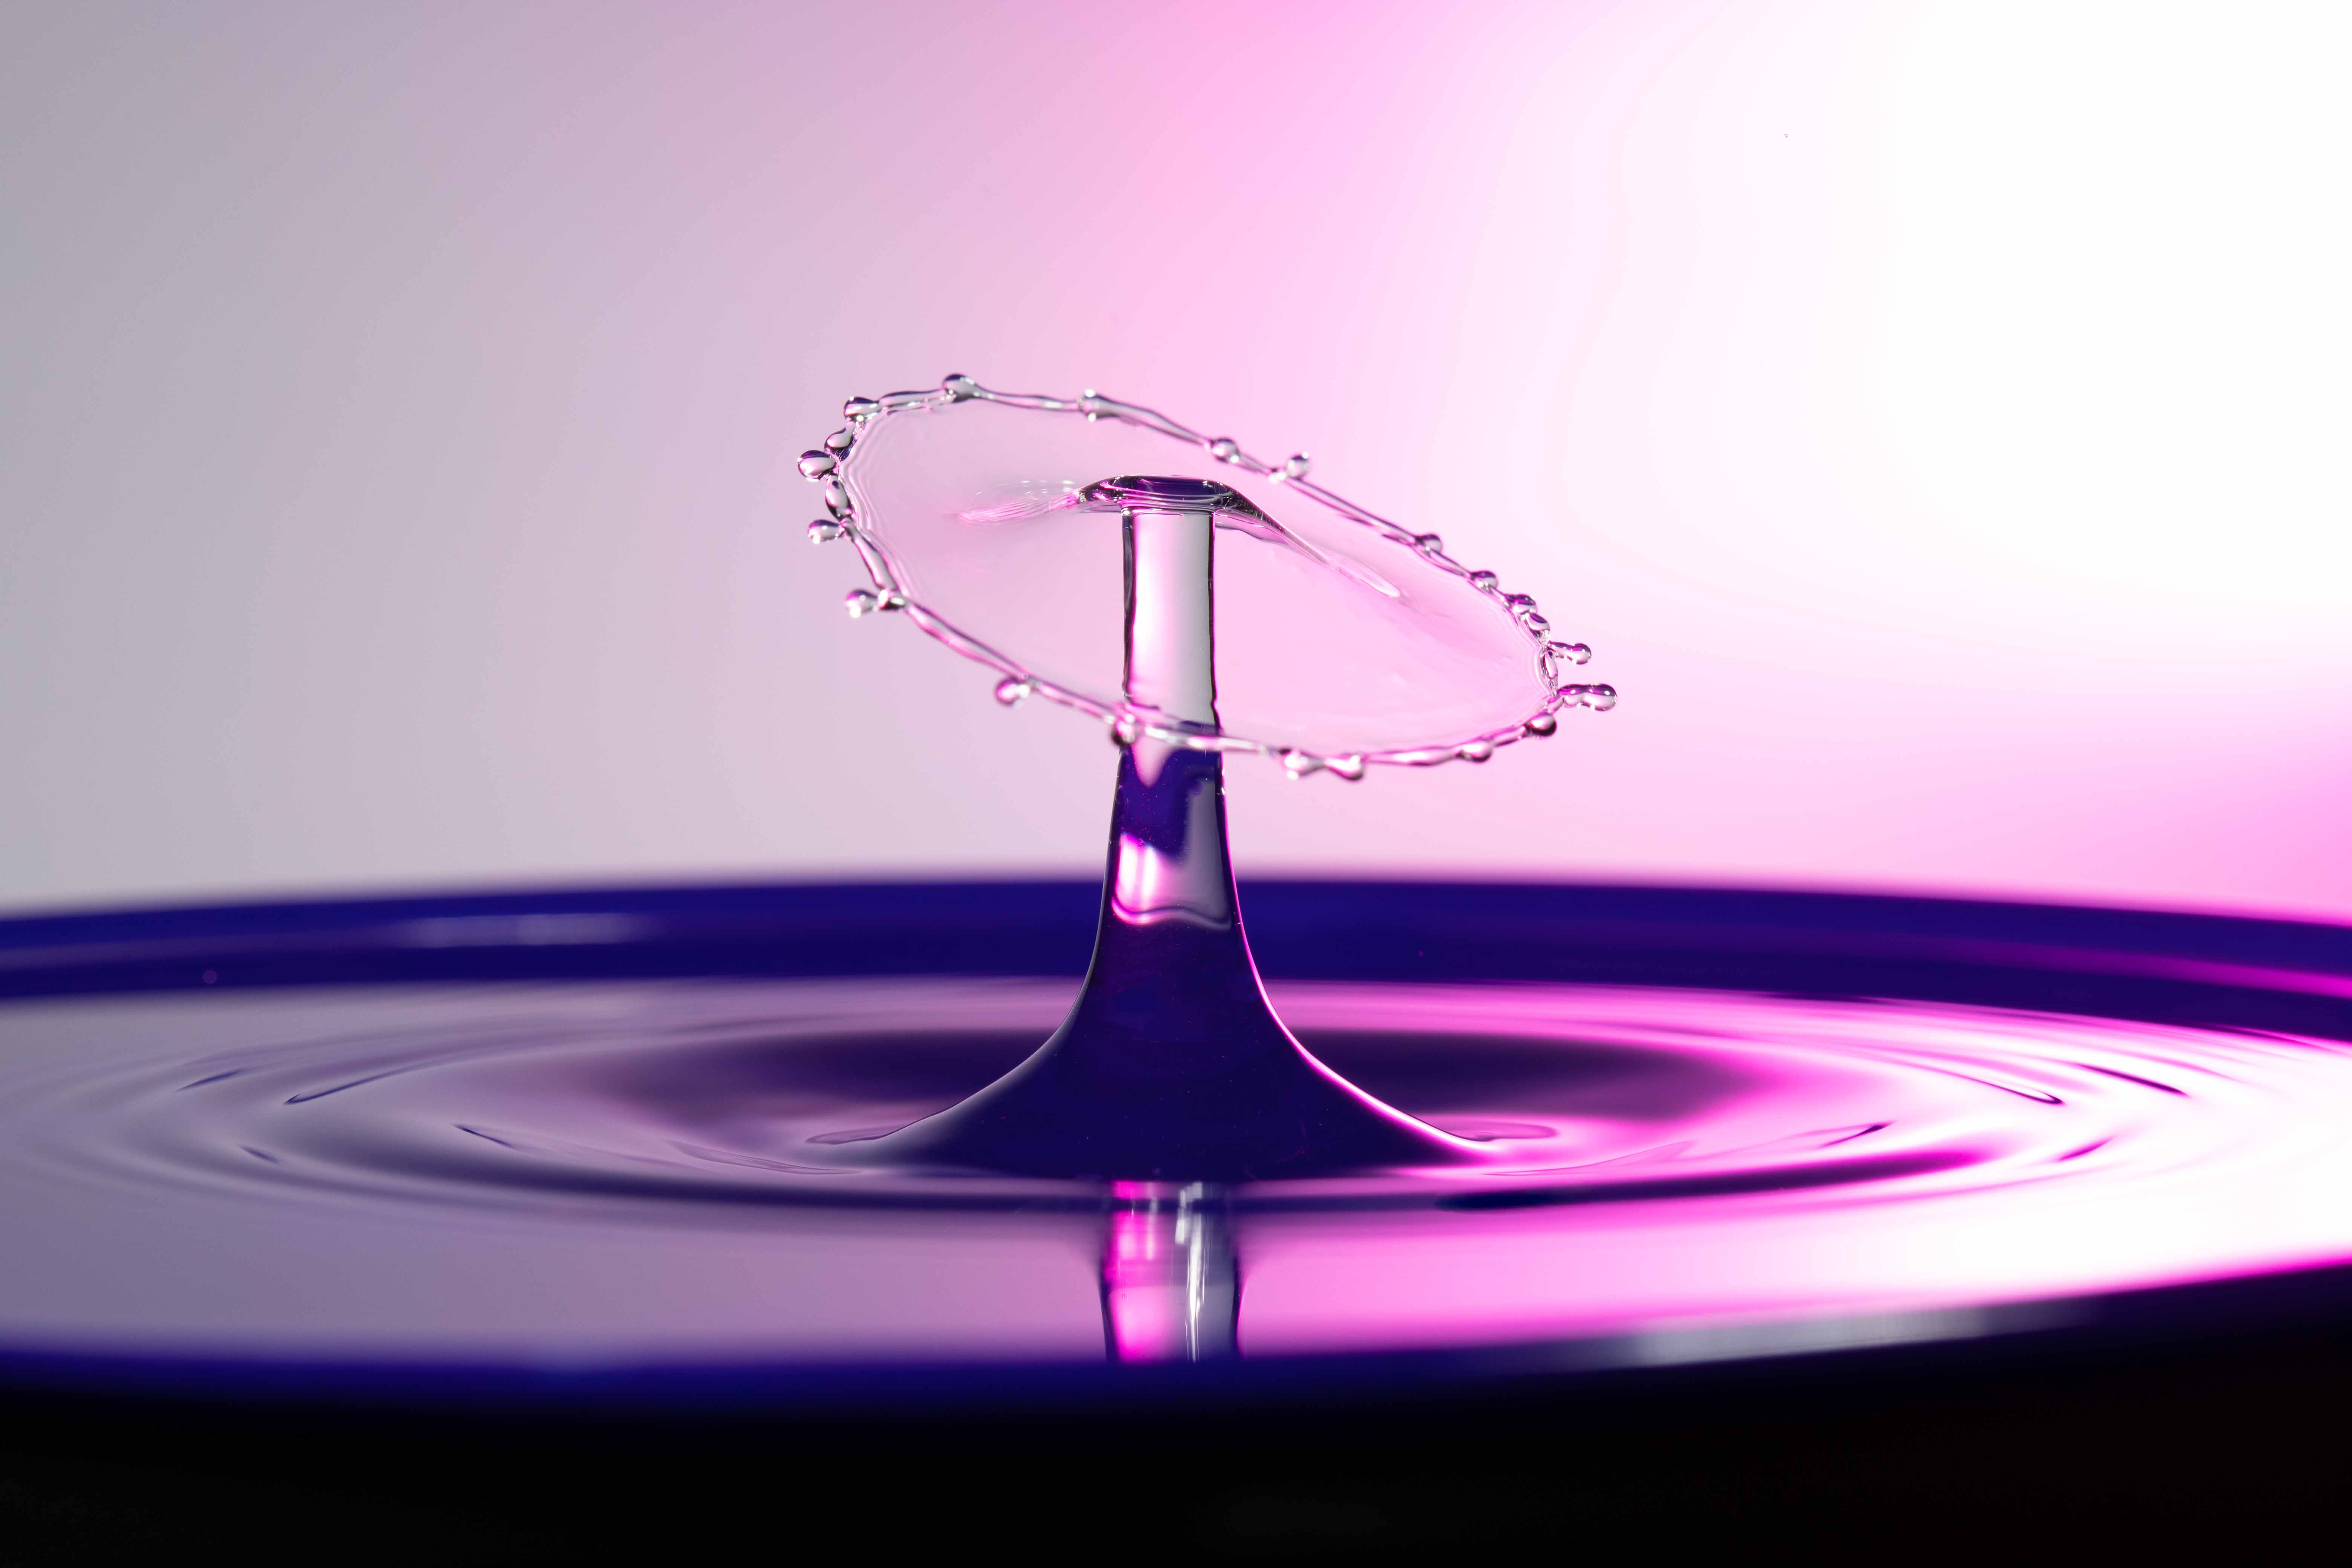 Studio Water Drop Photography by Steven Jungerwirth